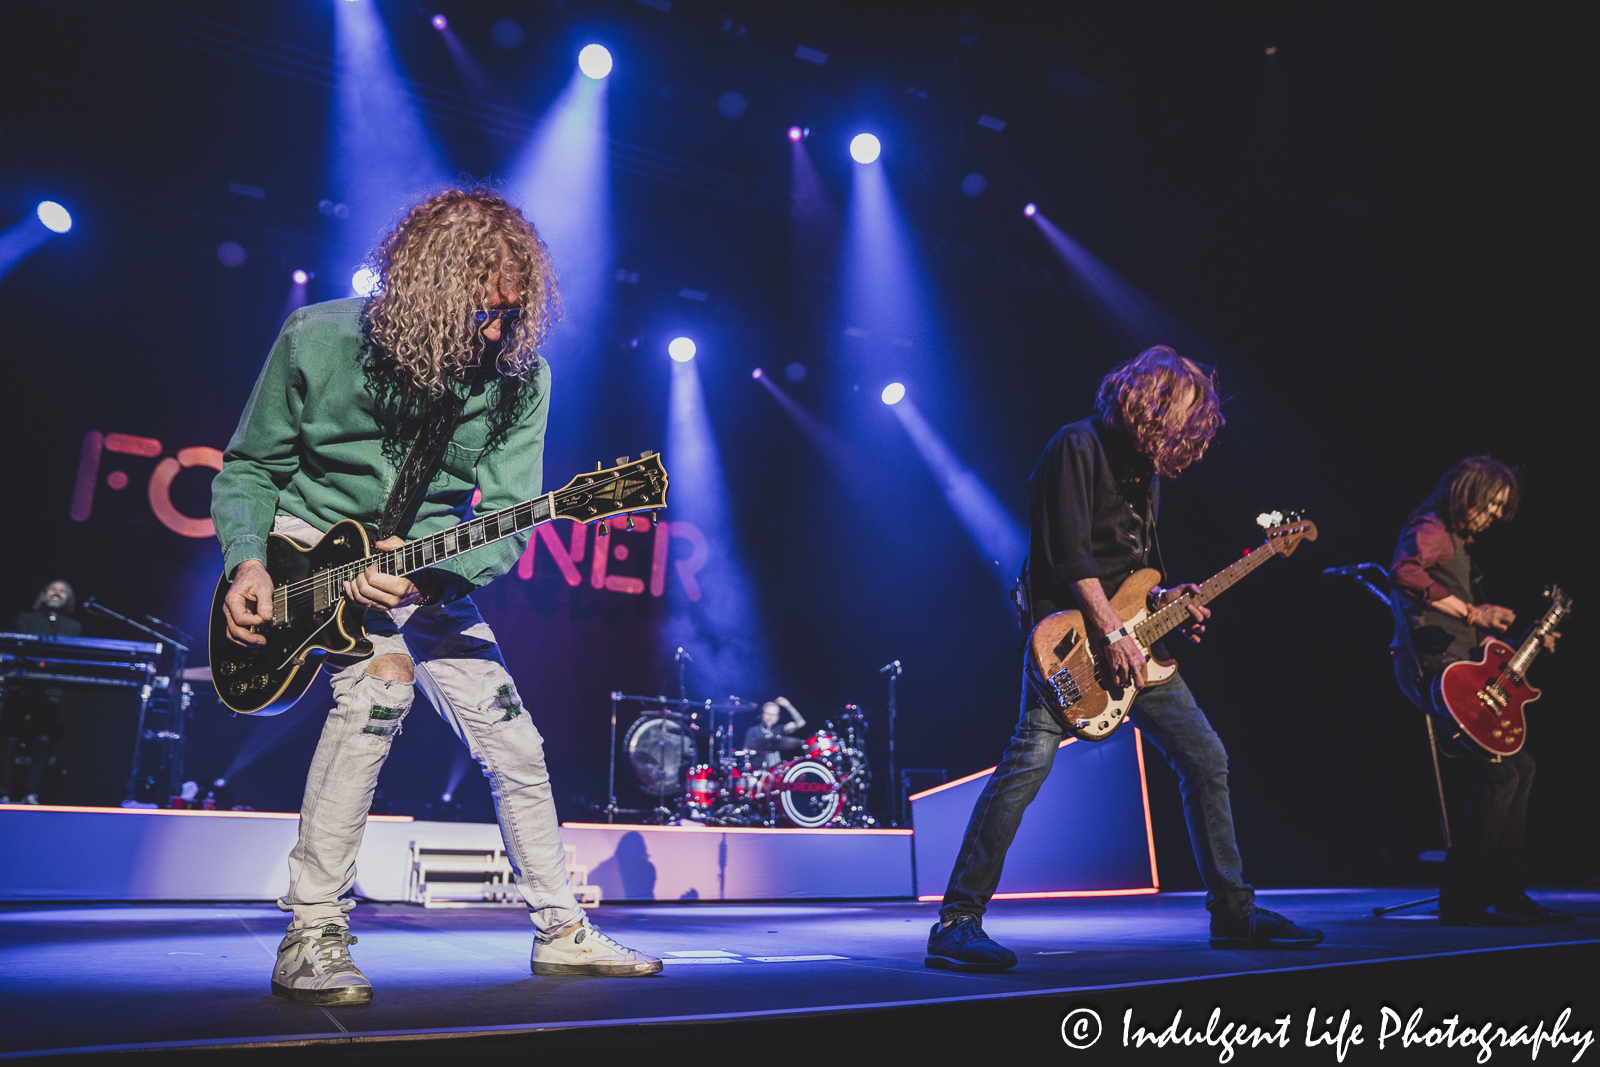 Foreigner band members Michael Bluestein, Bruce Watson, Chris Frazier, Jeff Pilson and Luis Maldonado performing together at Hartman Arena in Park City, KS on April 30, 2023.